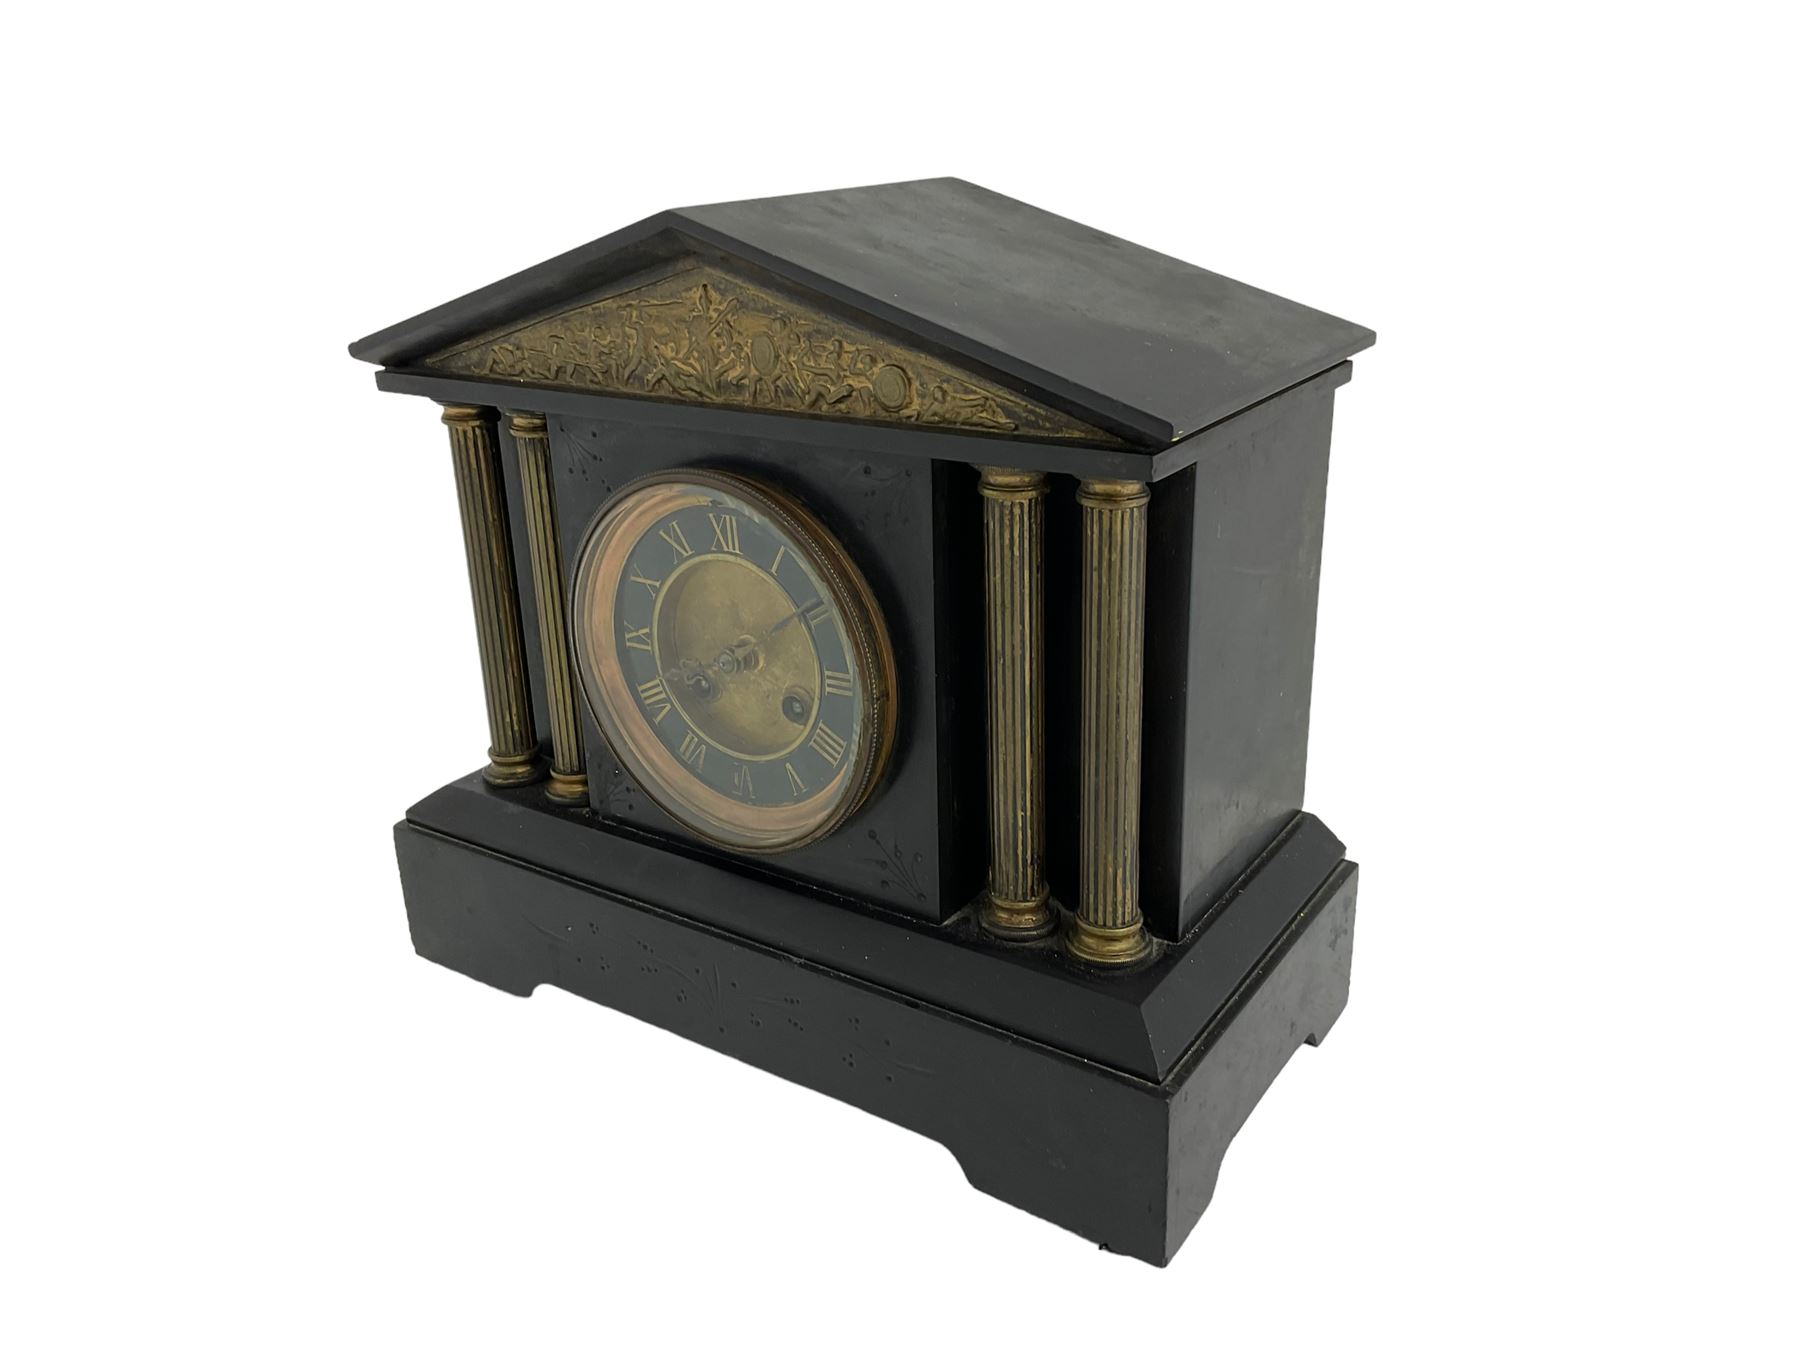 French slate mantle clock striking on a gong. - Image 2 of 3